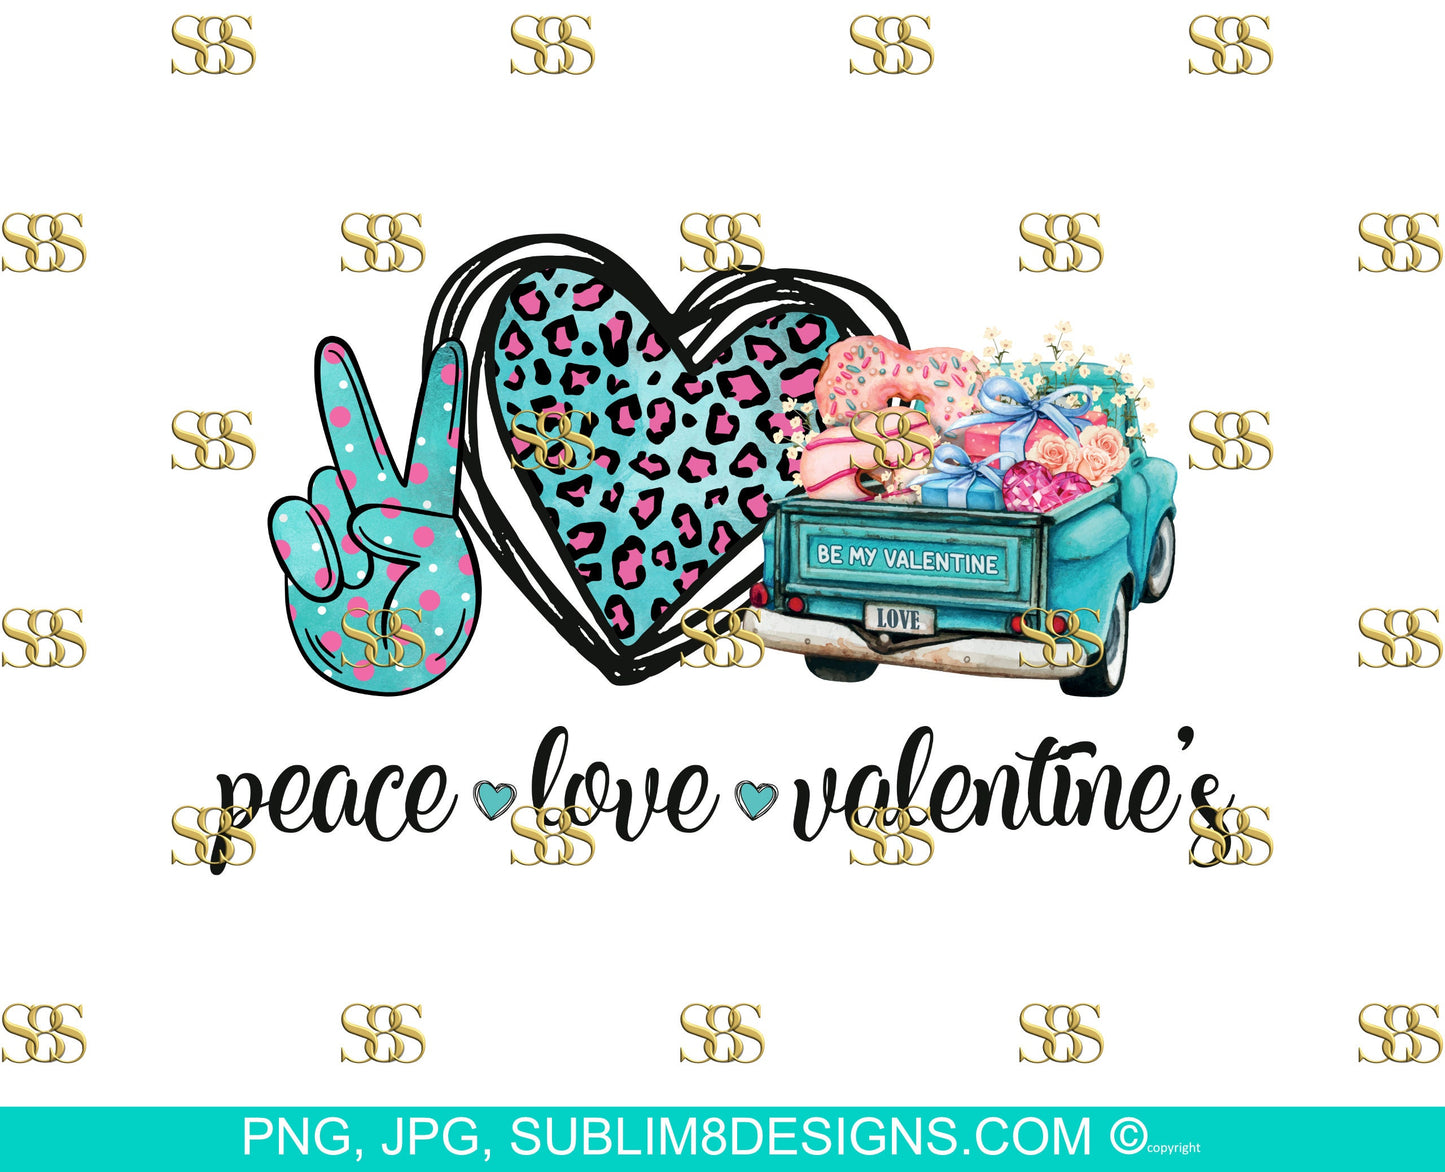 Peace Love Valentines | Valentine's Day | Blue Valentines Design | Flower Truck | Pink Leopard Hearts | Sublimation Design PNG and JPG ONLY